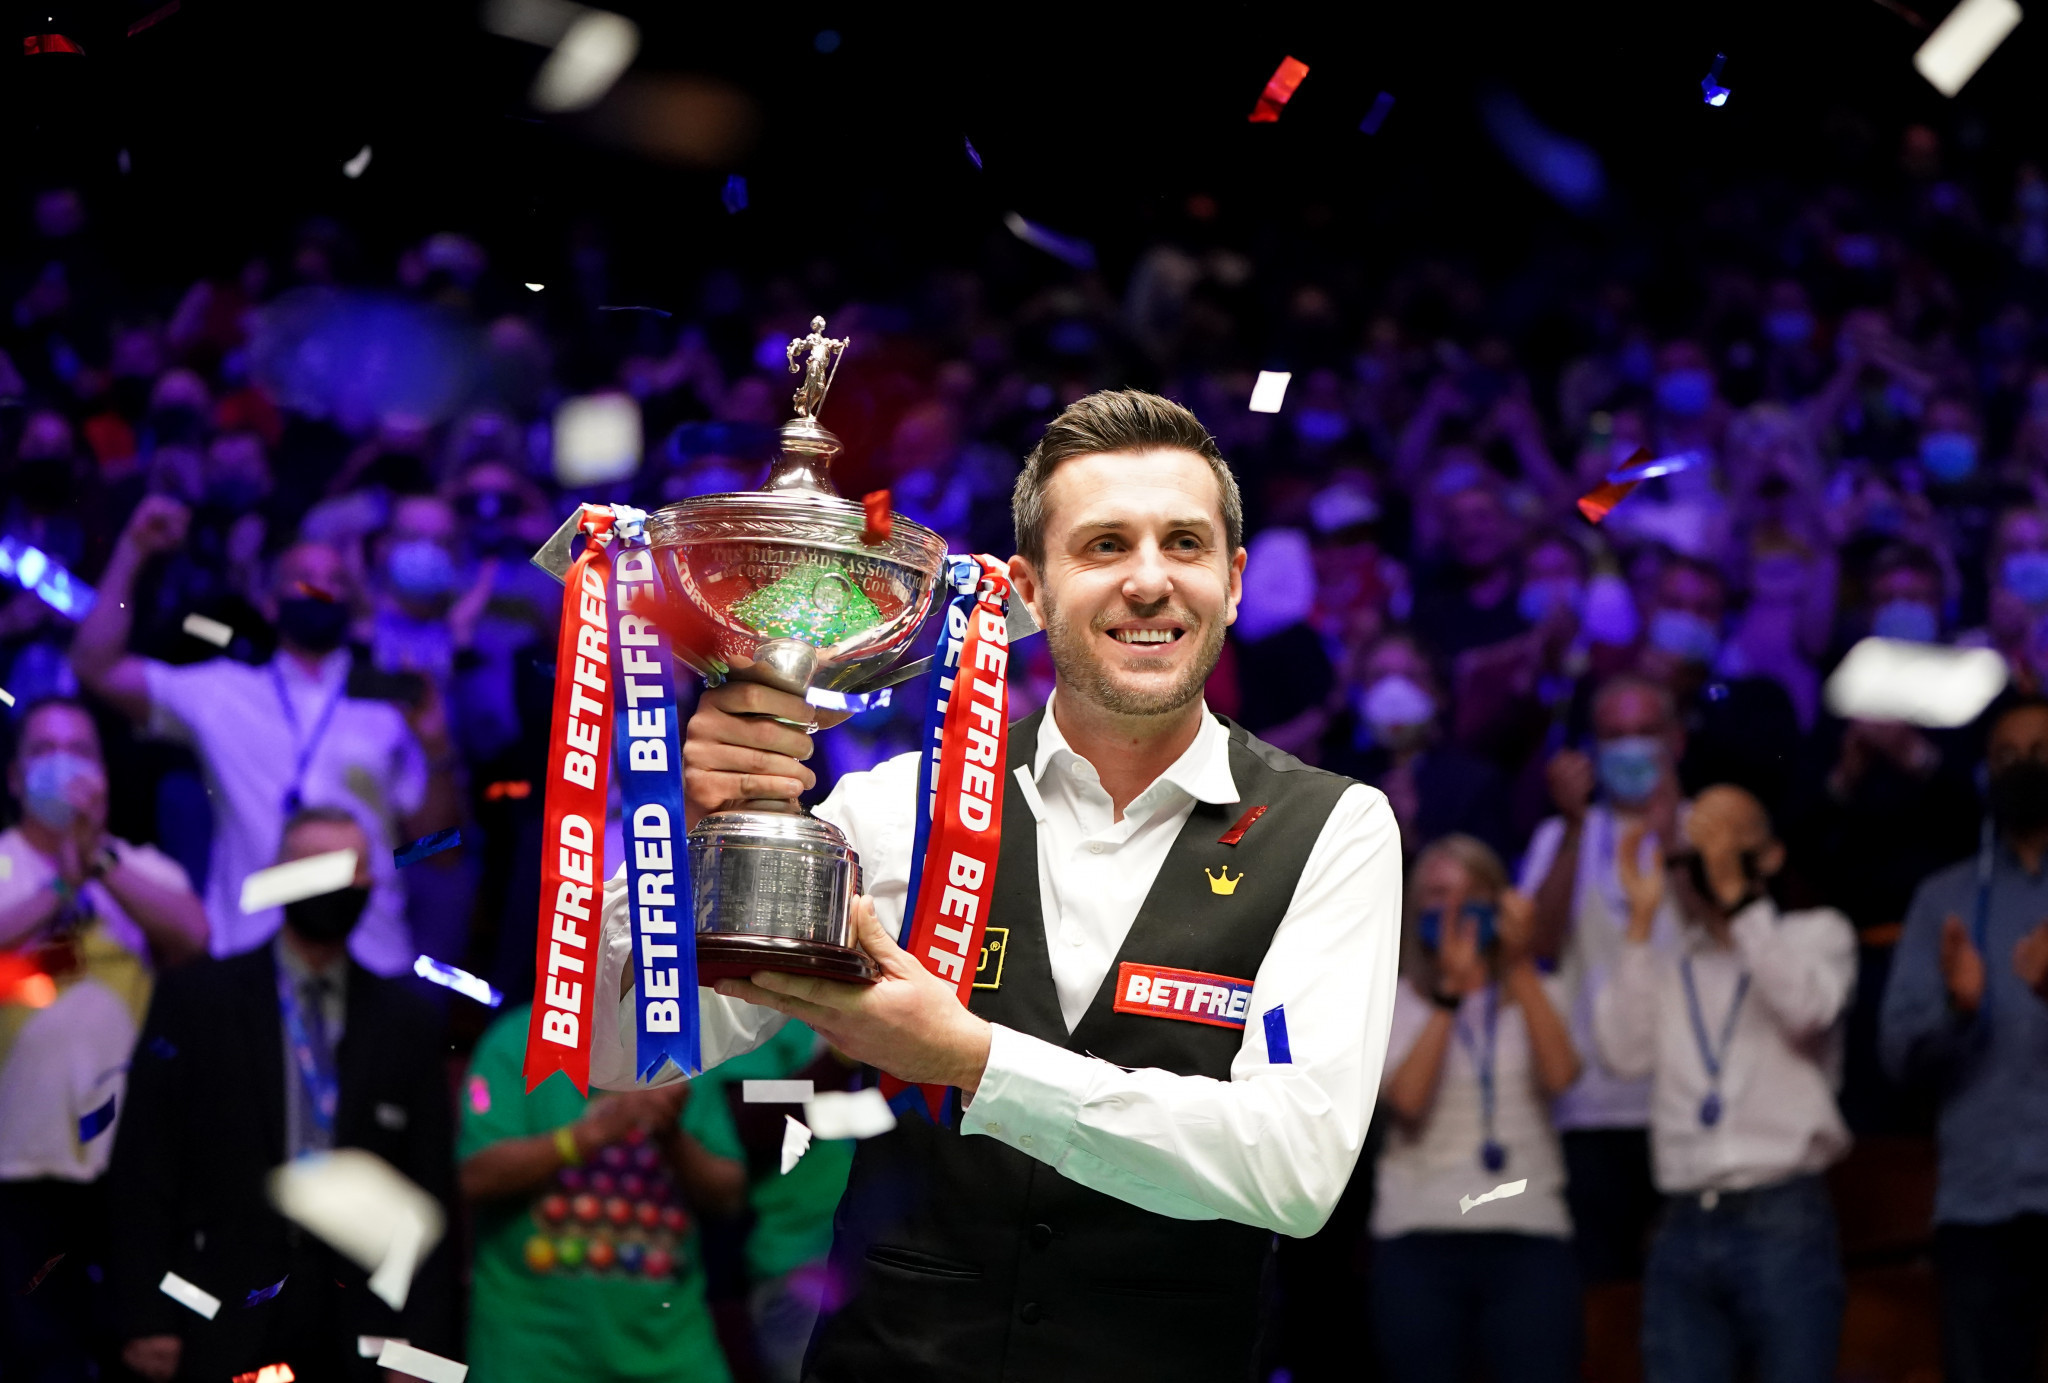 Selby set to defend World Snooker Championship "with different perspective" after depression struggles